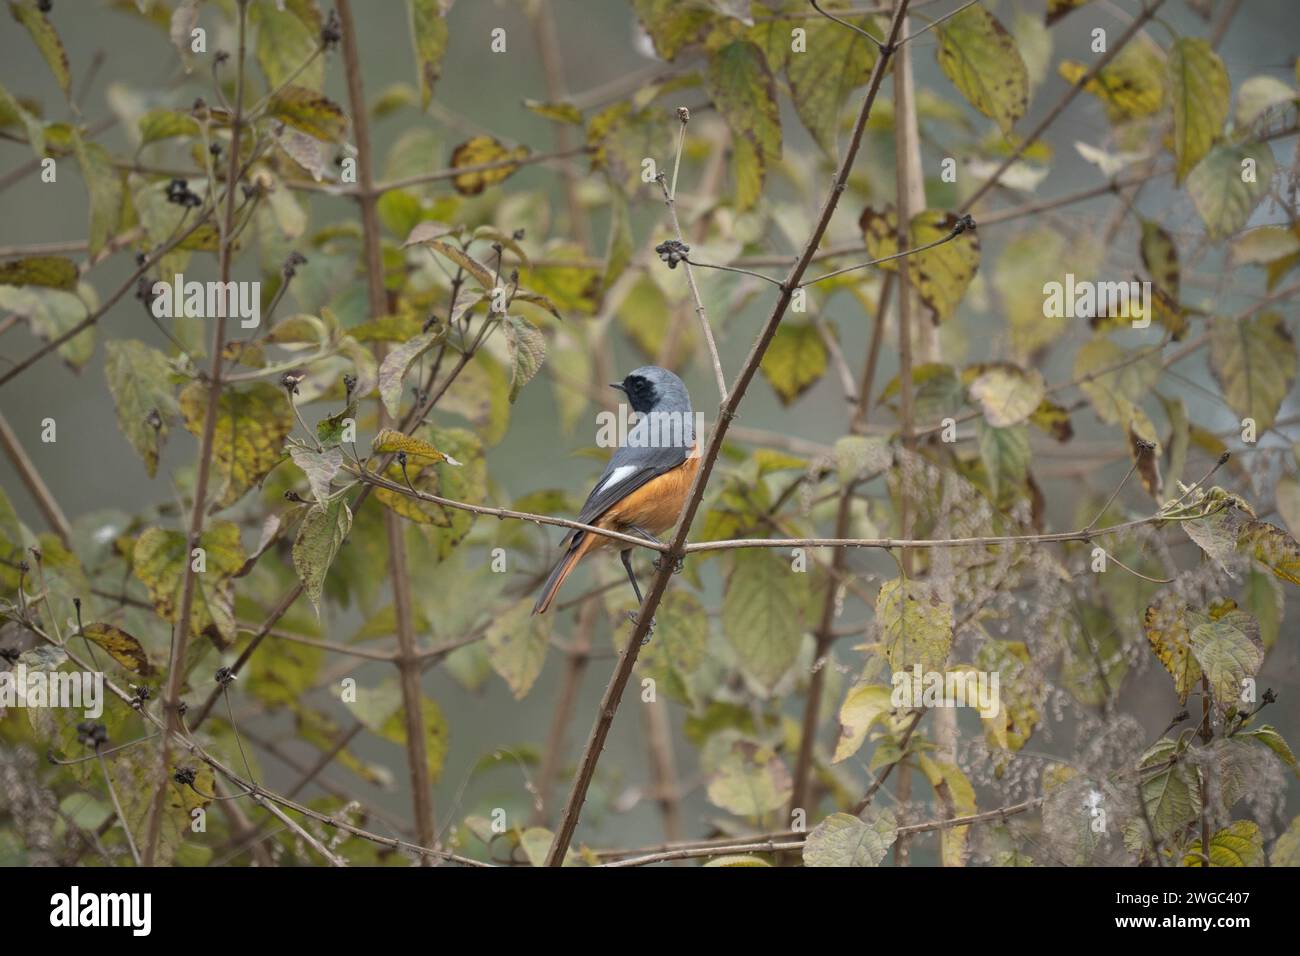 An environmental shot of a Hodgsons Redstart bird in the branches of a tree. Stock Photo